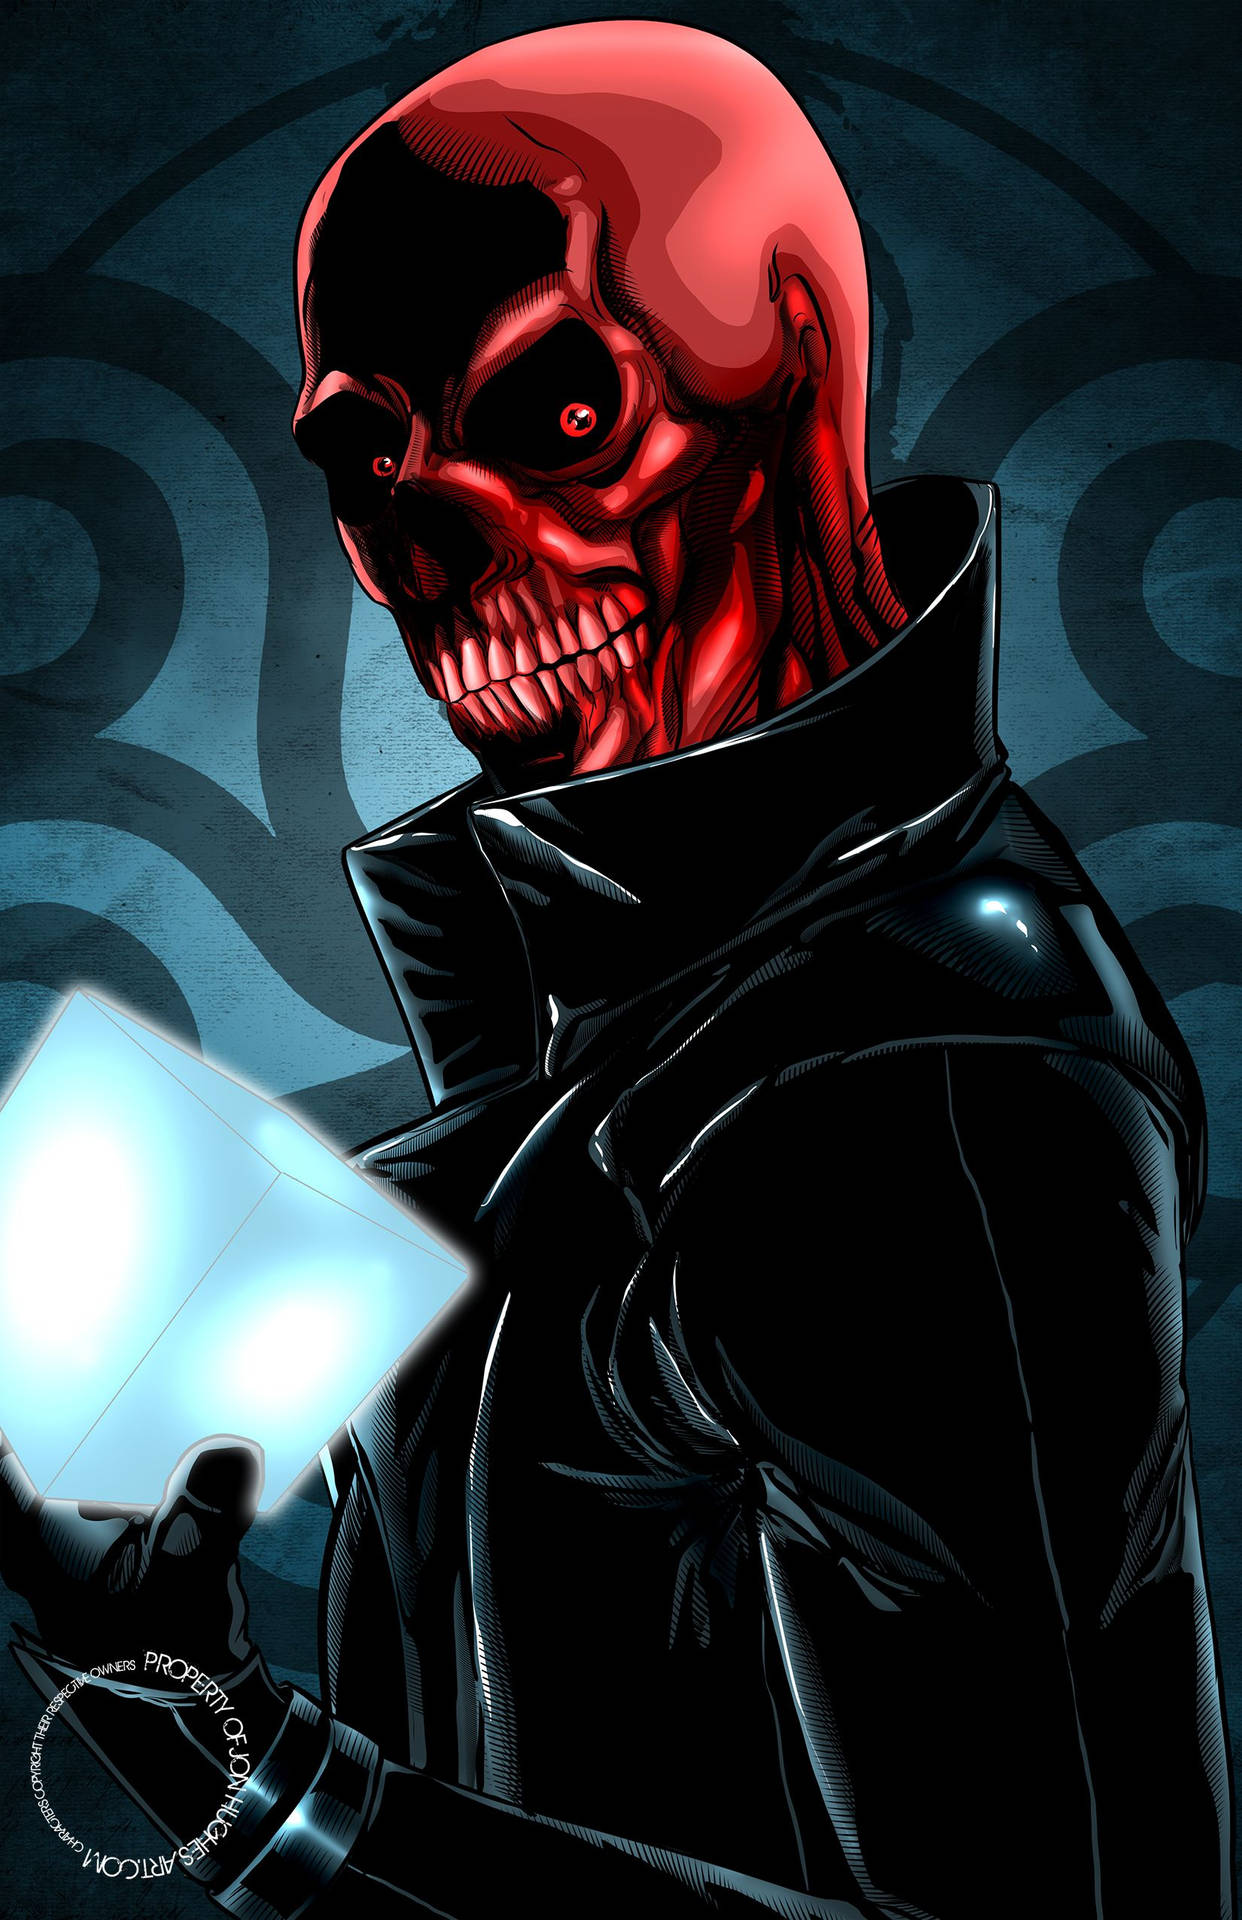 Grinning Red Skull Holding Tesseract